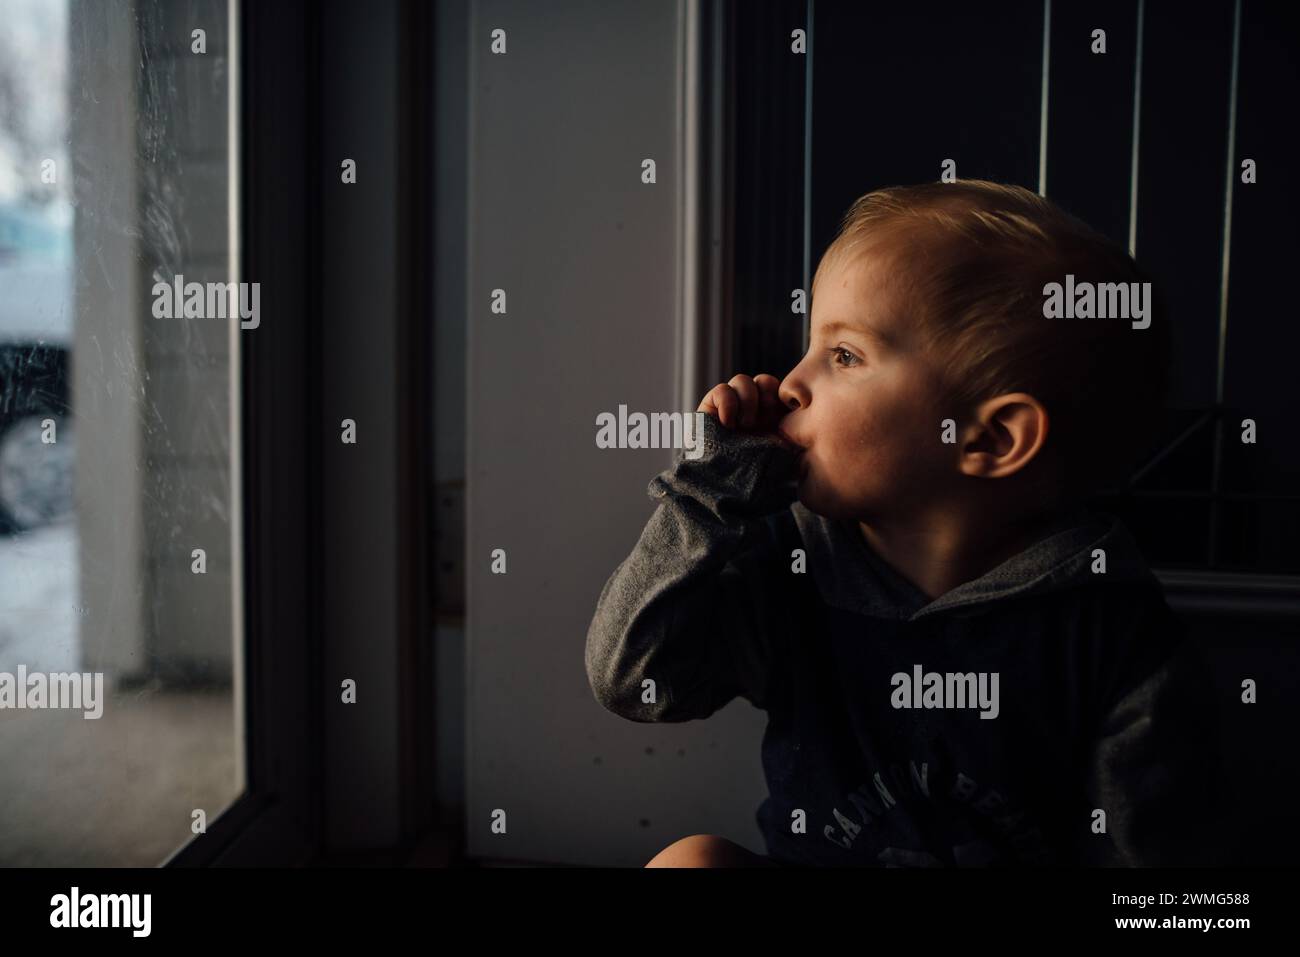 Profile of toddler sucking thumb while looking out window. Stock Photo